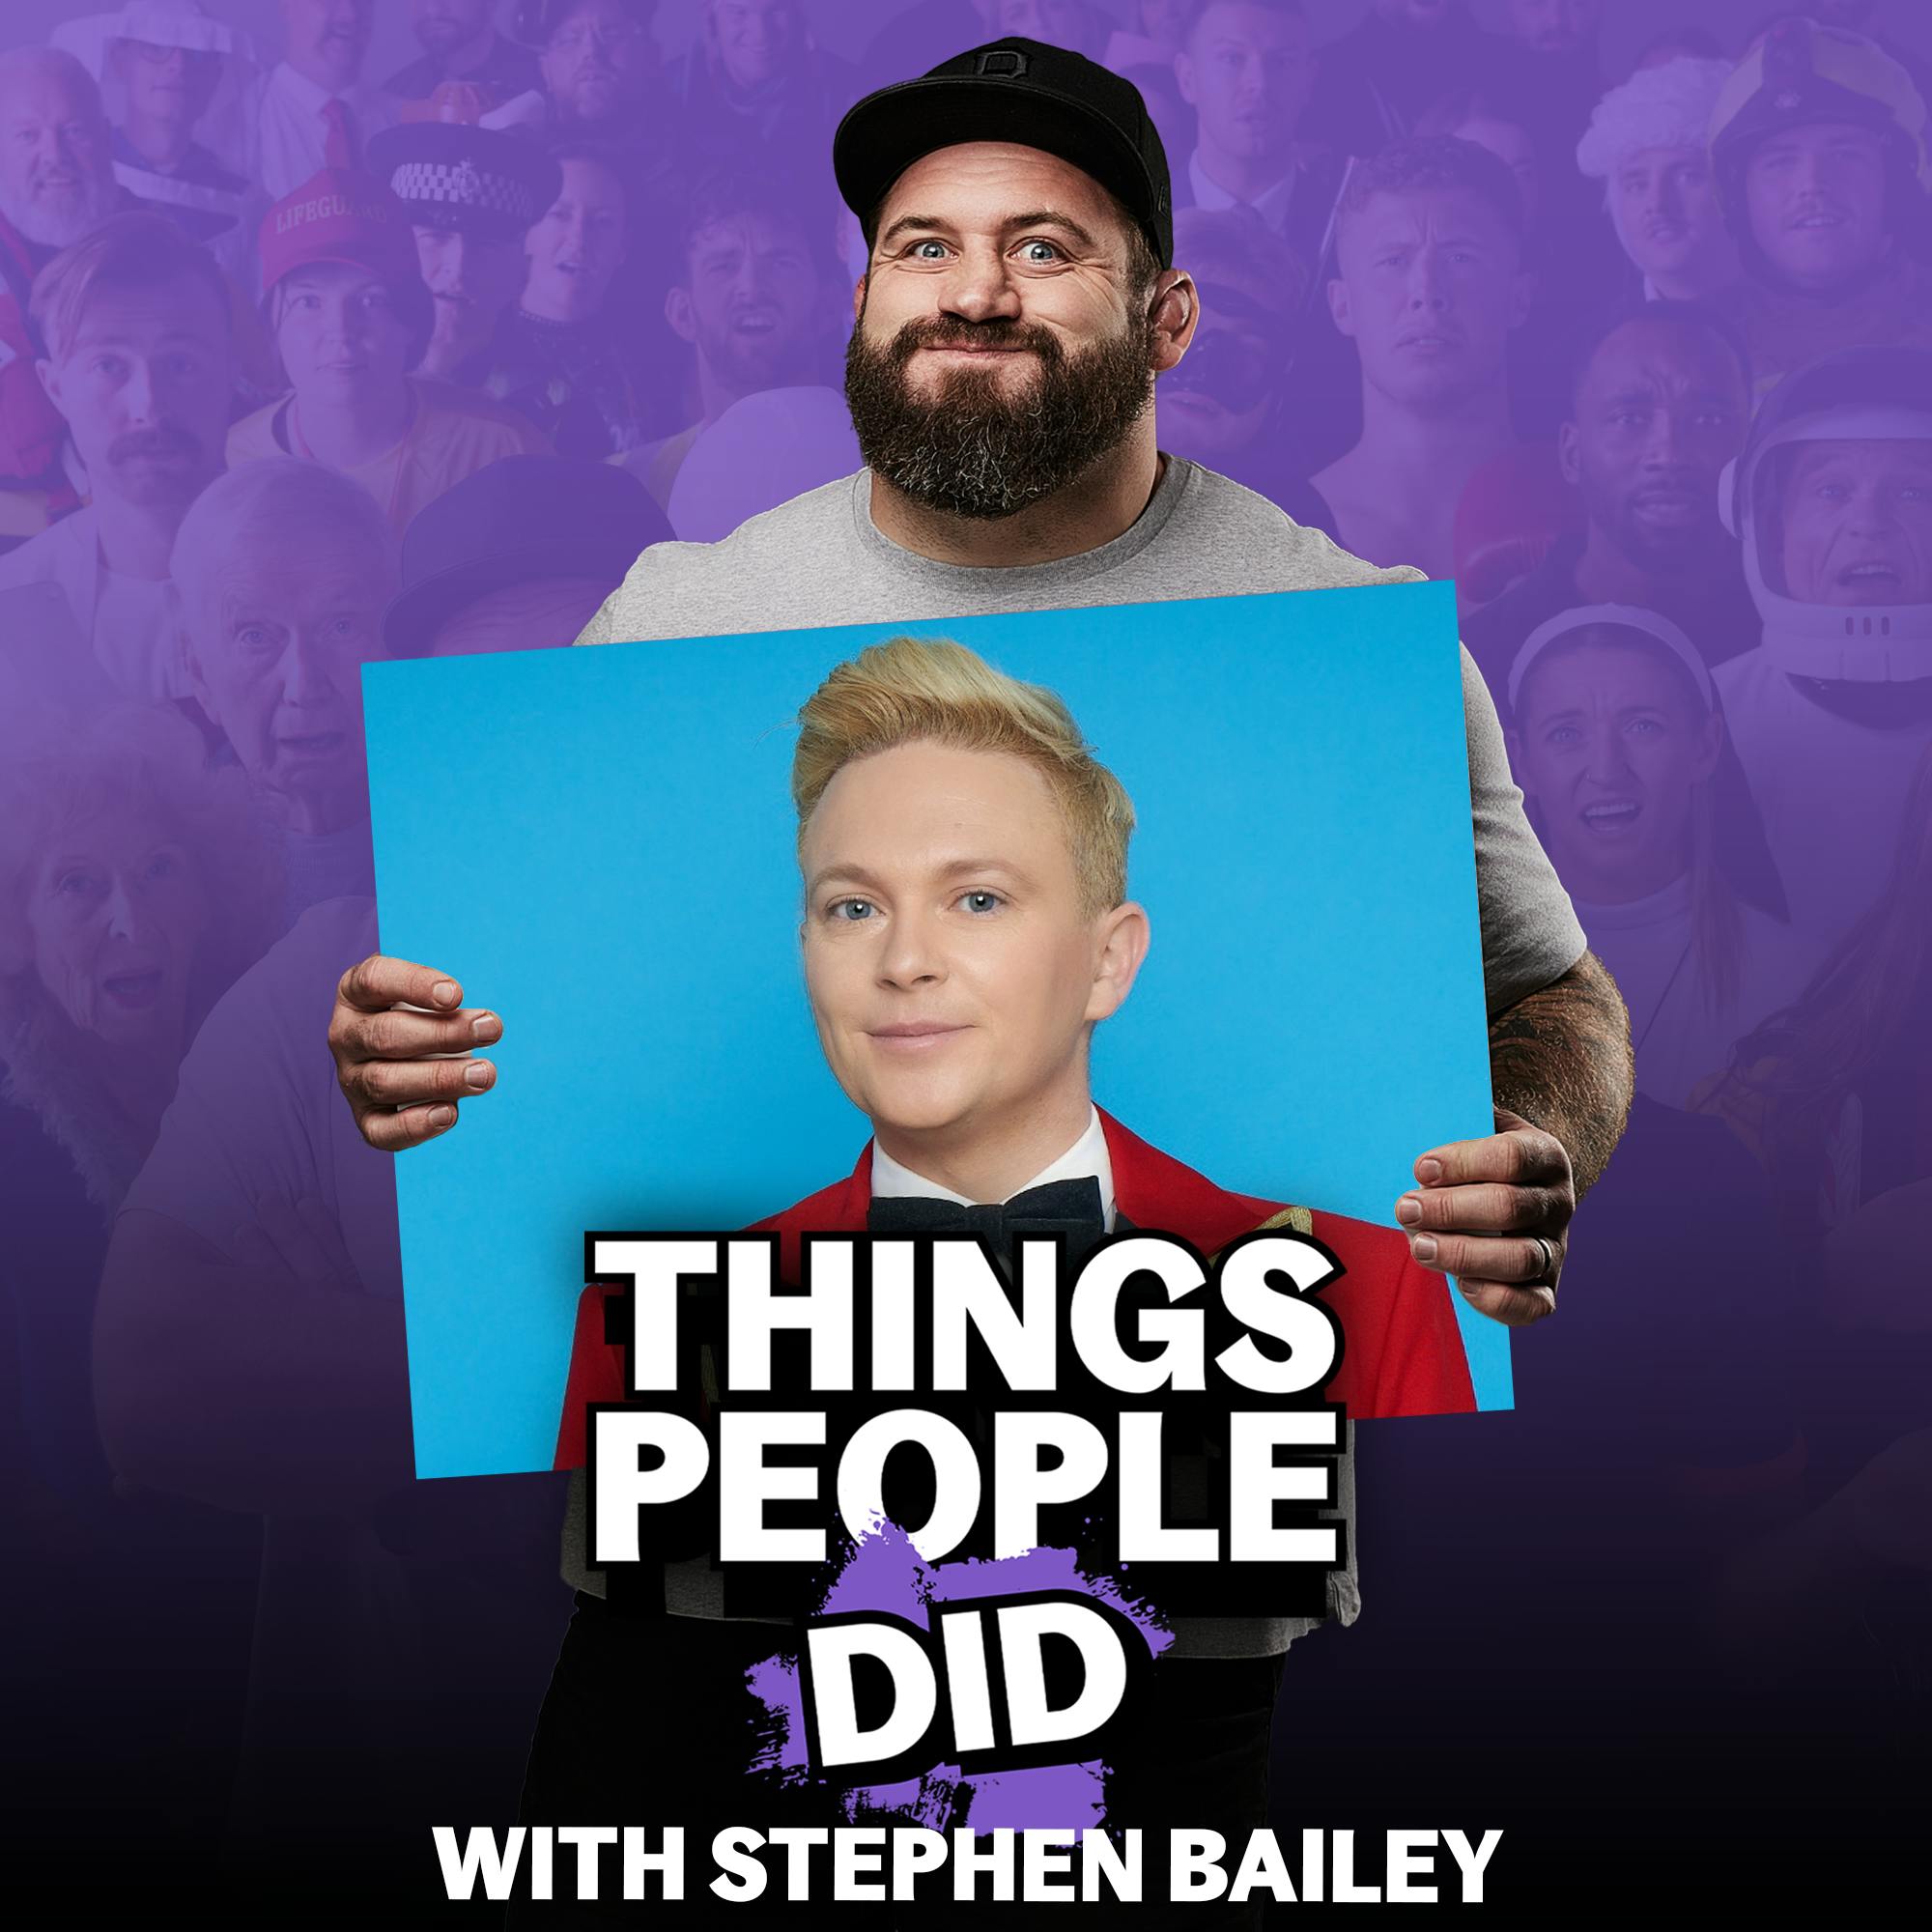 Things People Did, with Stephen Bailey: A guide on how to make Joe Marler uncomfortable